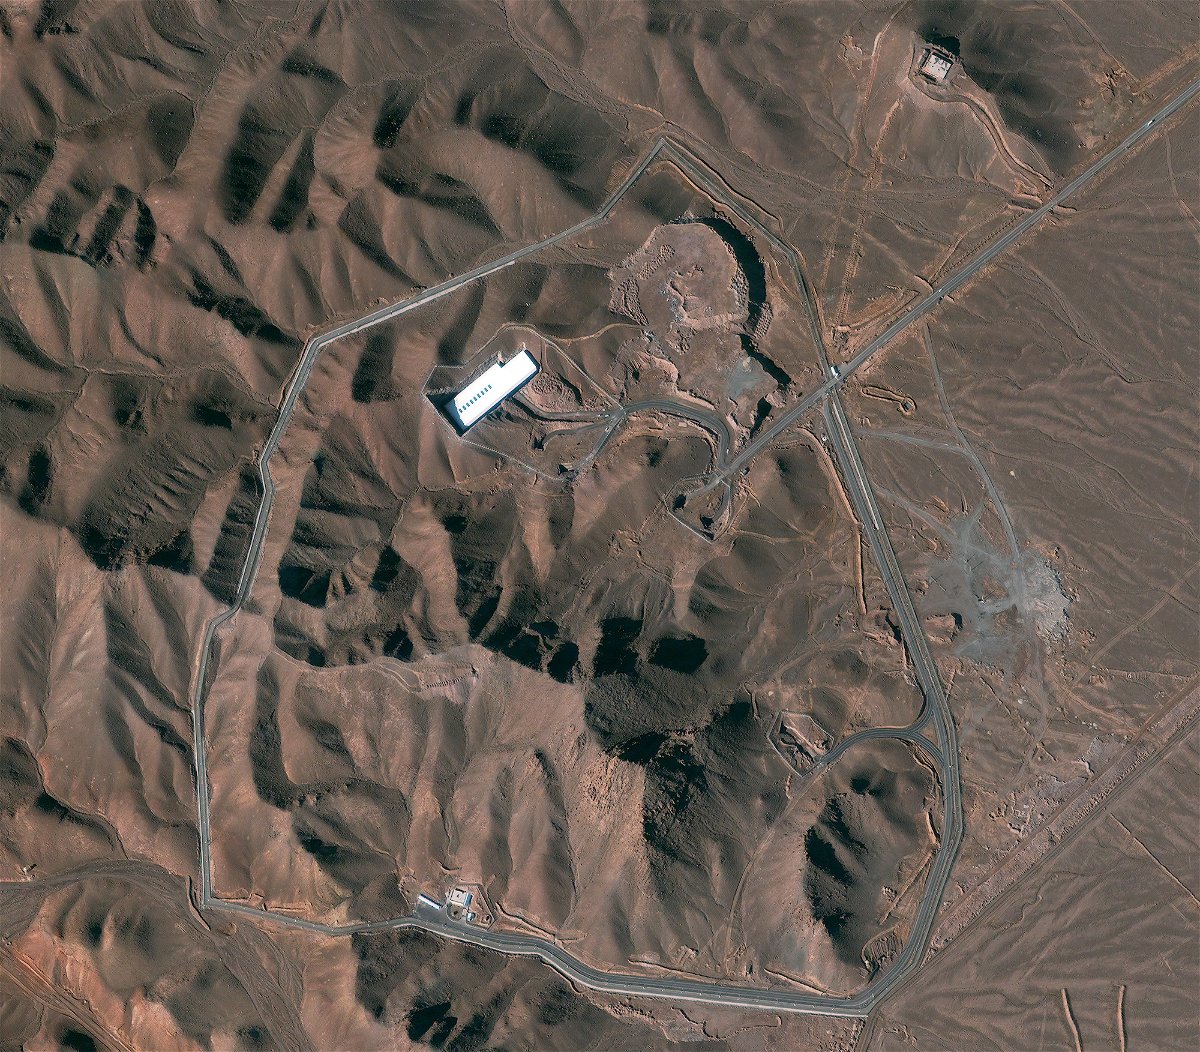 <i>DigitalGlobe/Maxar/Getty Images/FILE</i><br/>A satellite image of the Fordow facility in Iran.